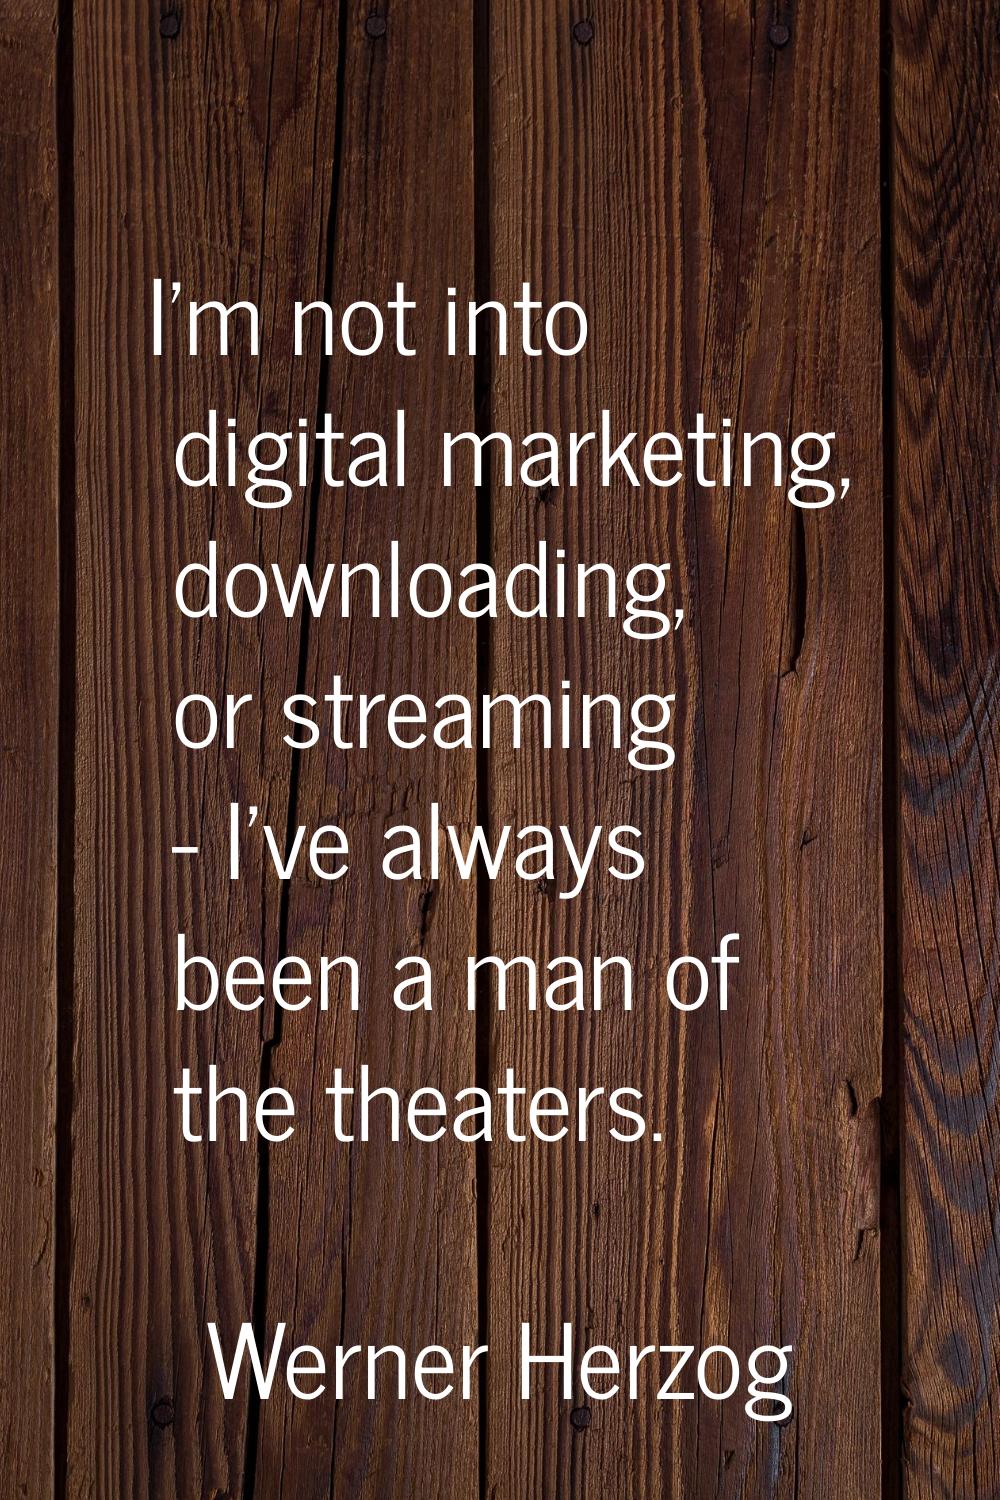 I'm not into digital marketing, downloading, or streaming - I've always been a man of the theaters.